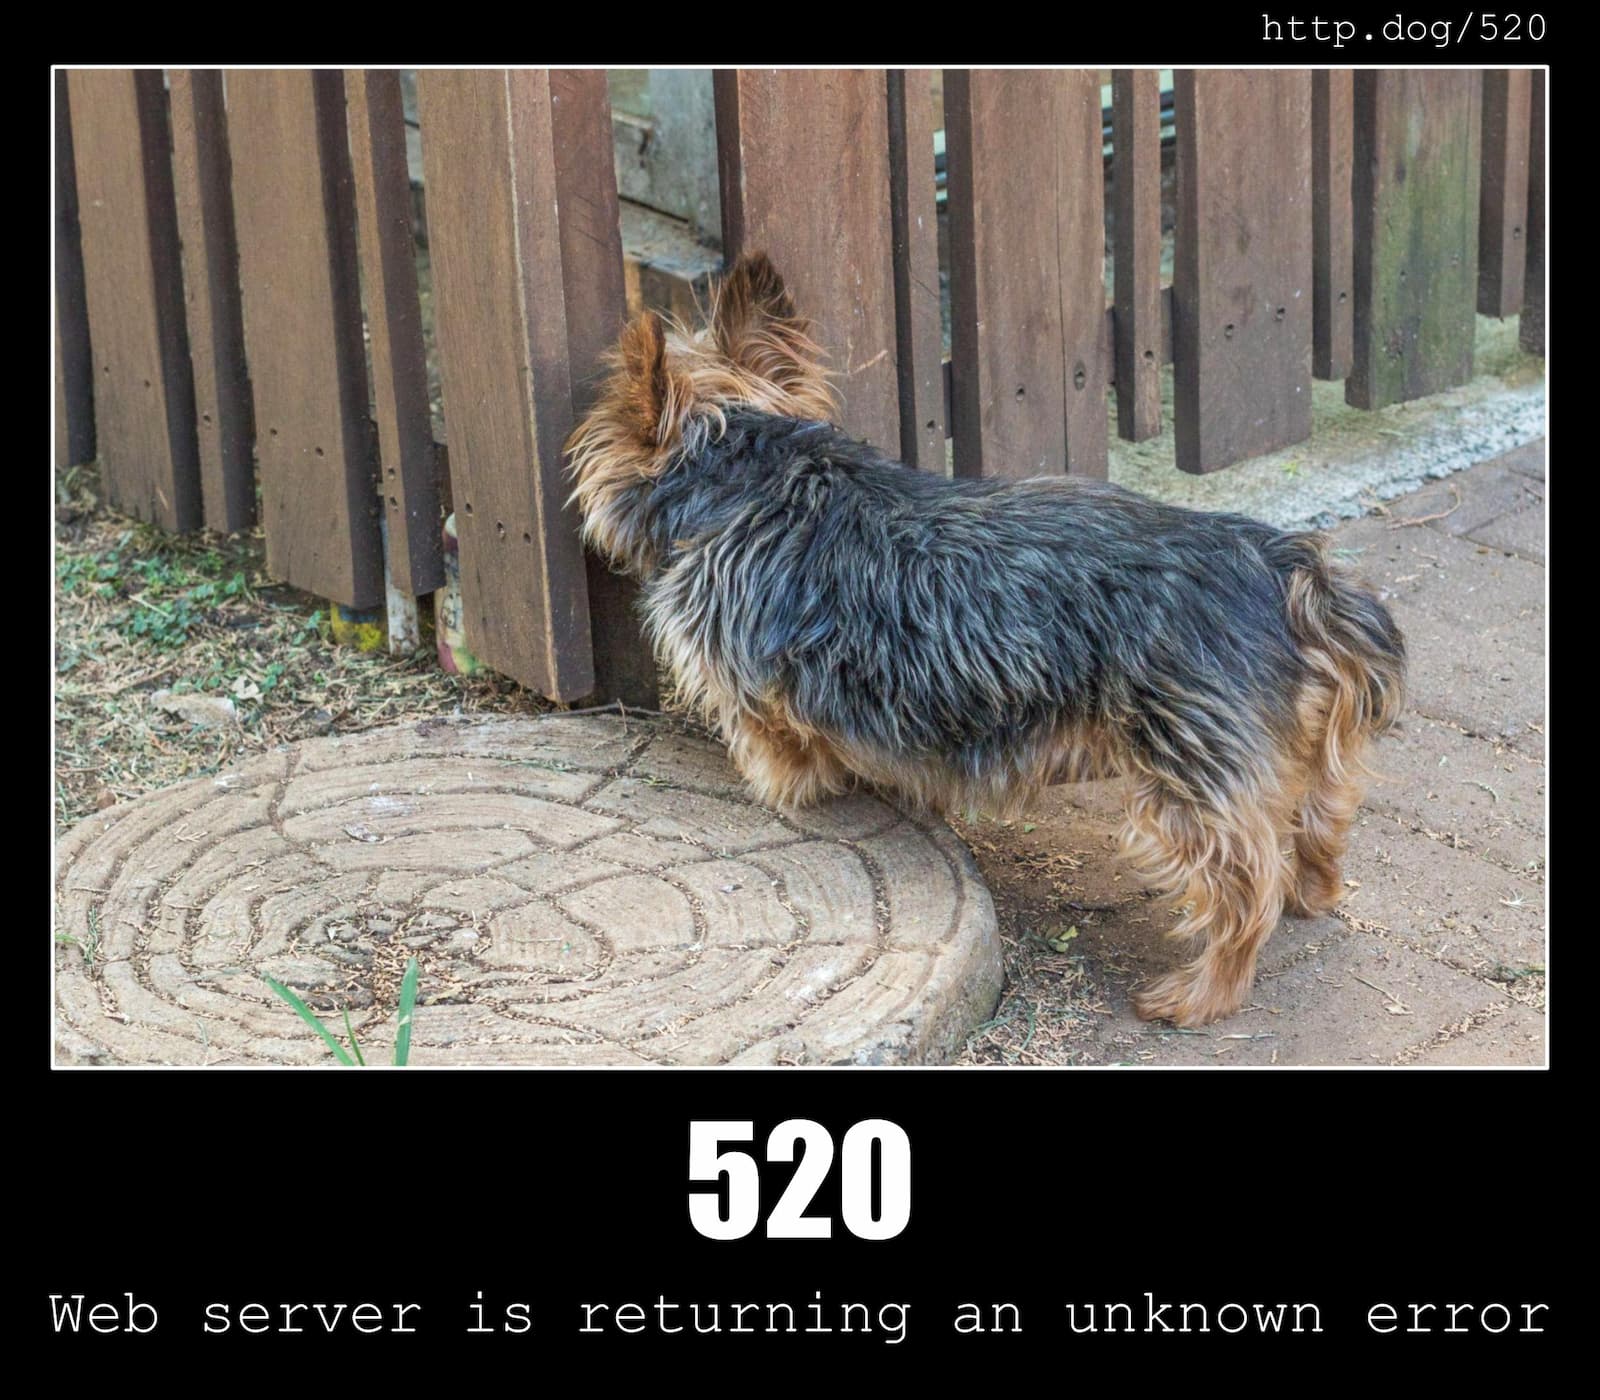 HTTP Status Code 520 Web server is returning an unknown error & Dogs